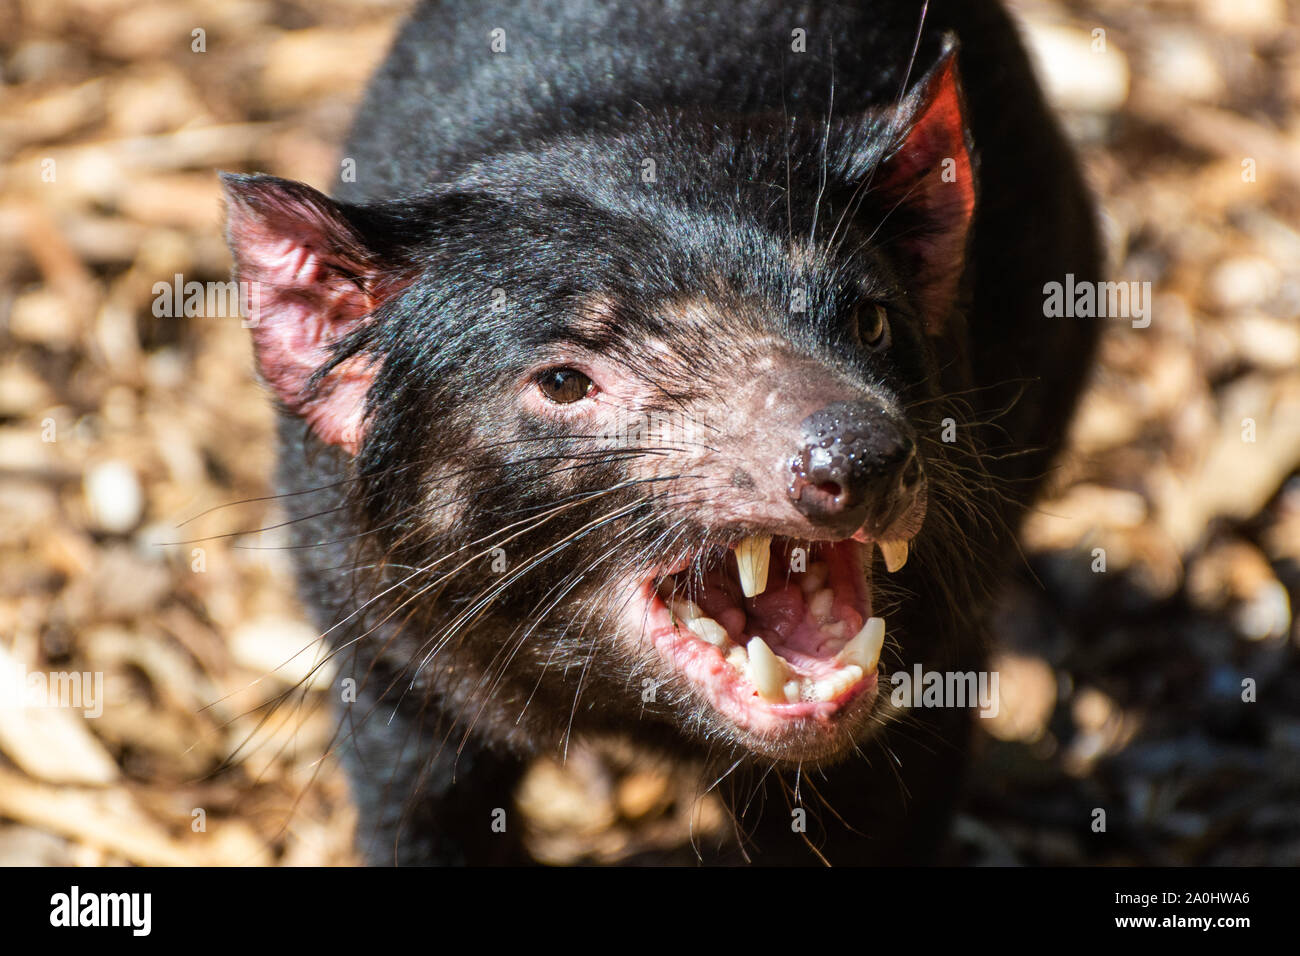 Tasmanian devil (Sarcophilus harrisii) with open mouth. Stock Photo